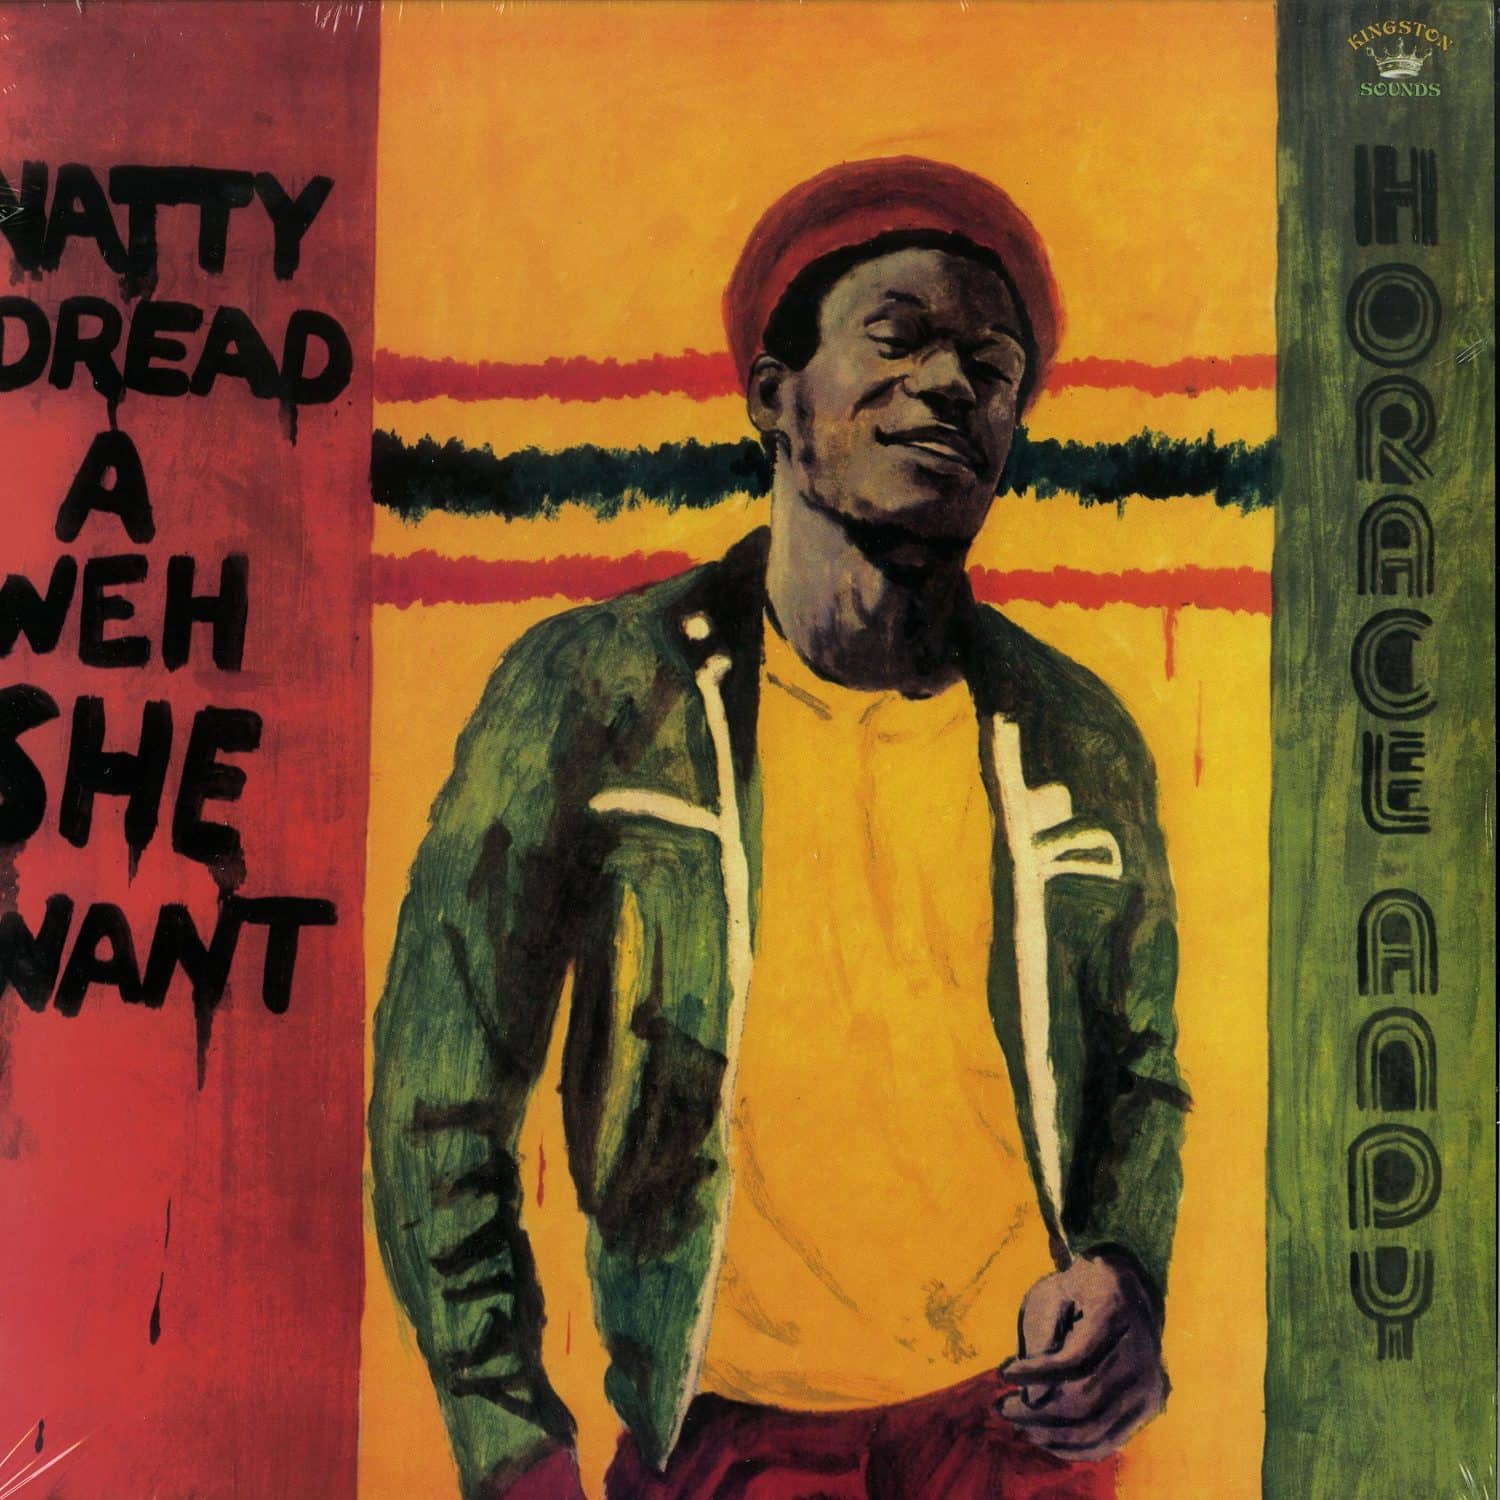 Horace Andy - NATTY DREAD A WEH SHE WENT 